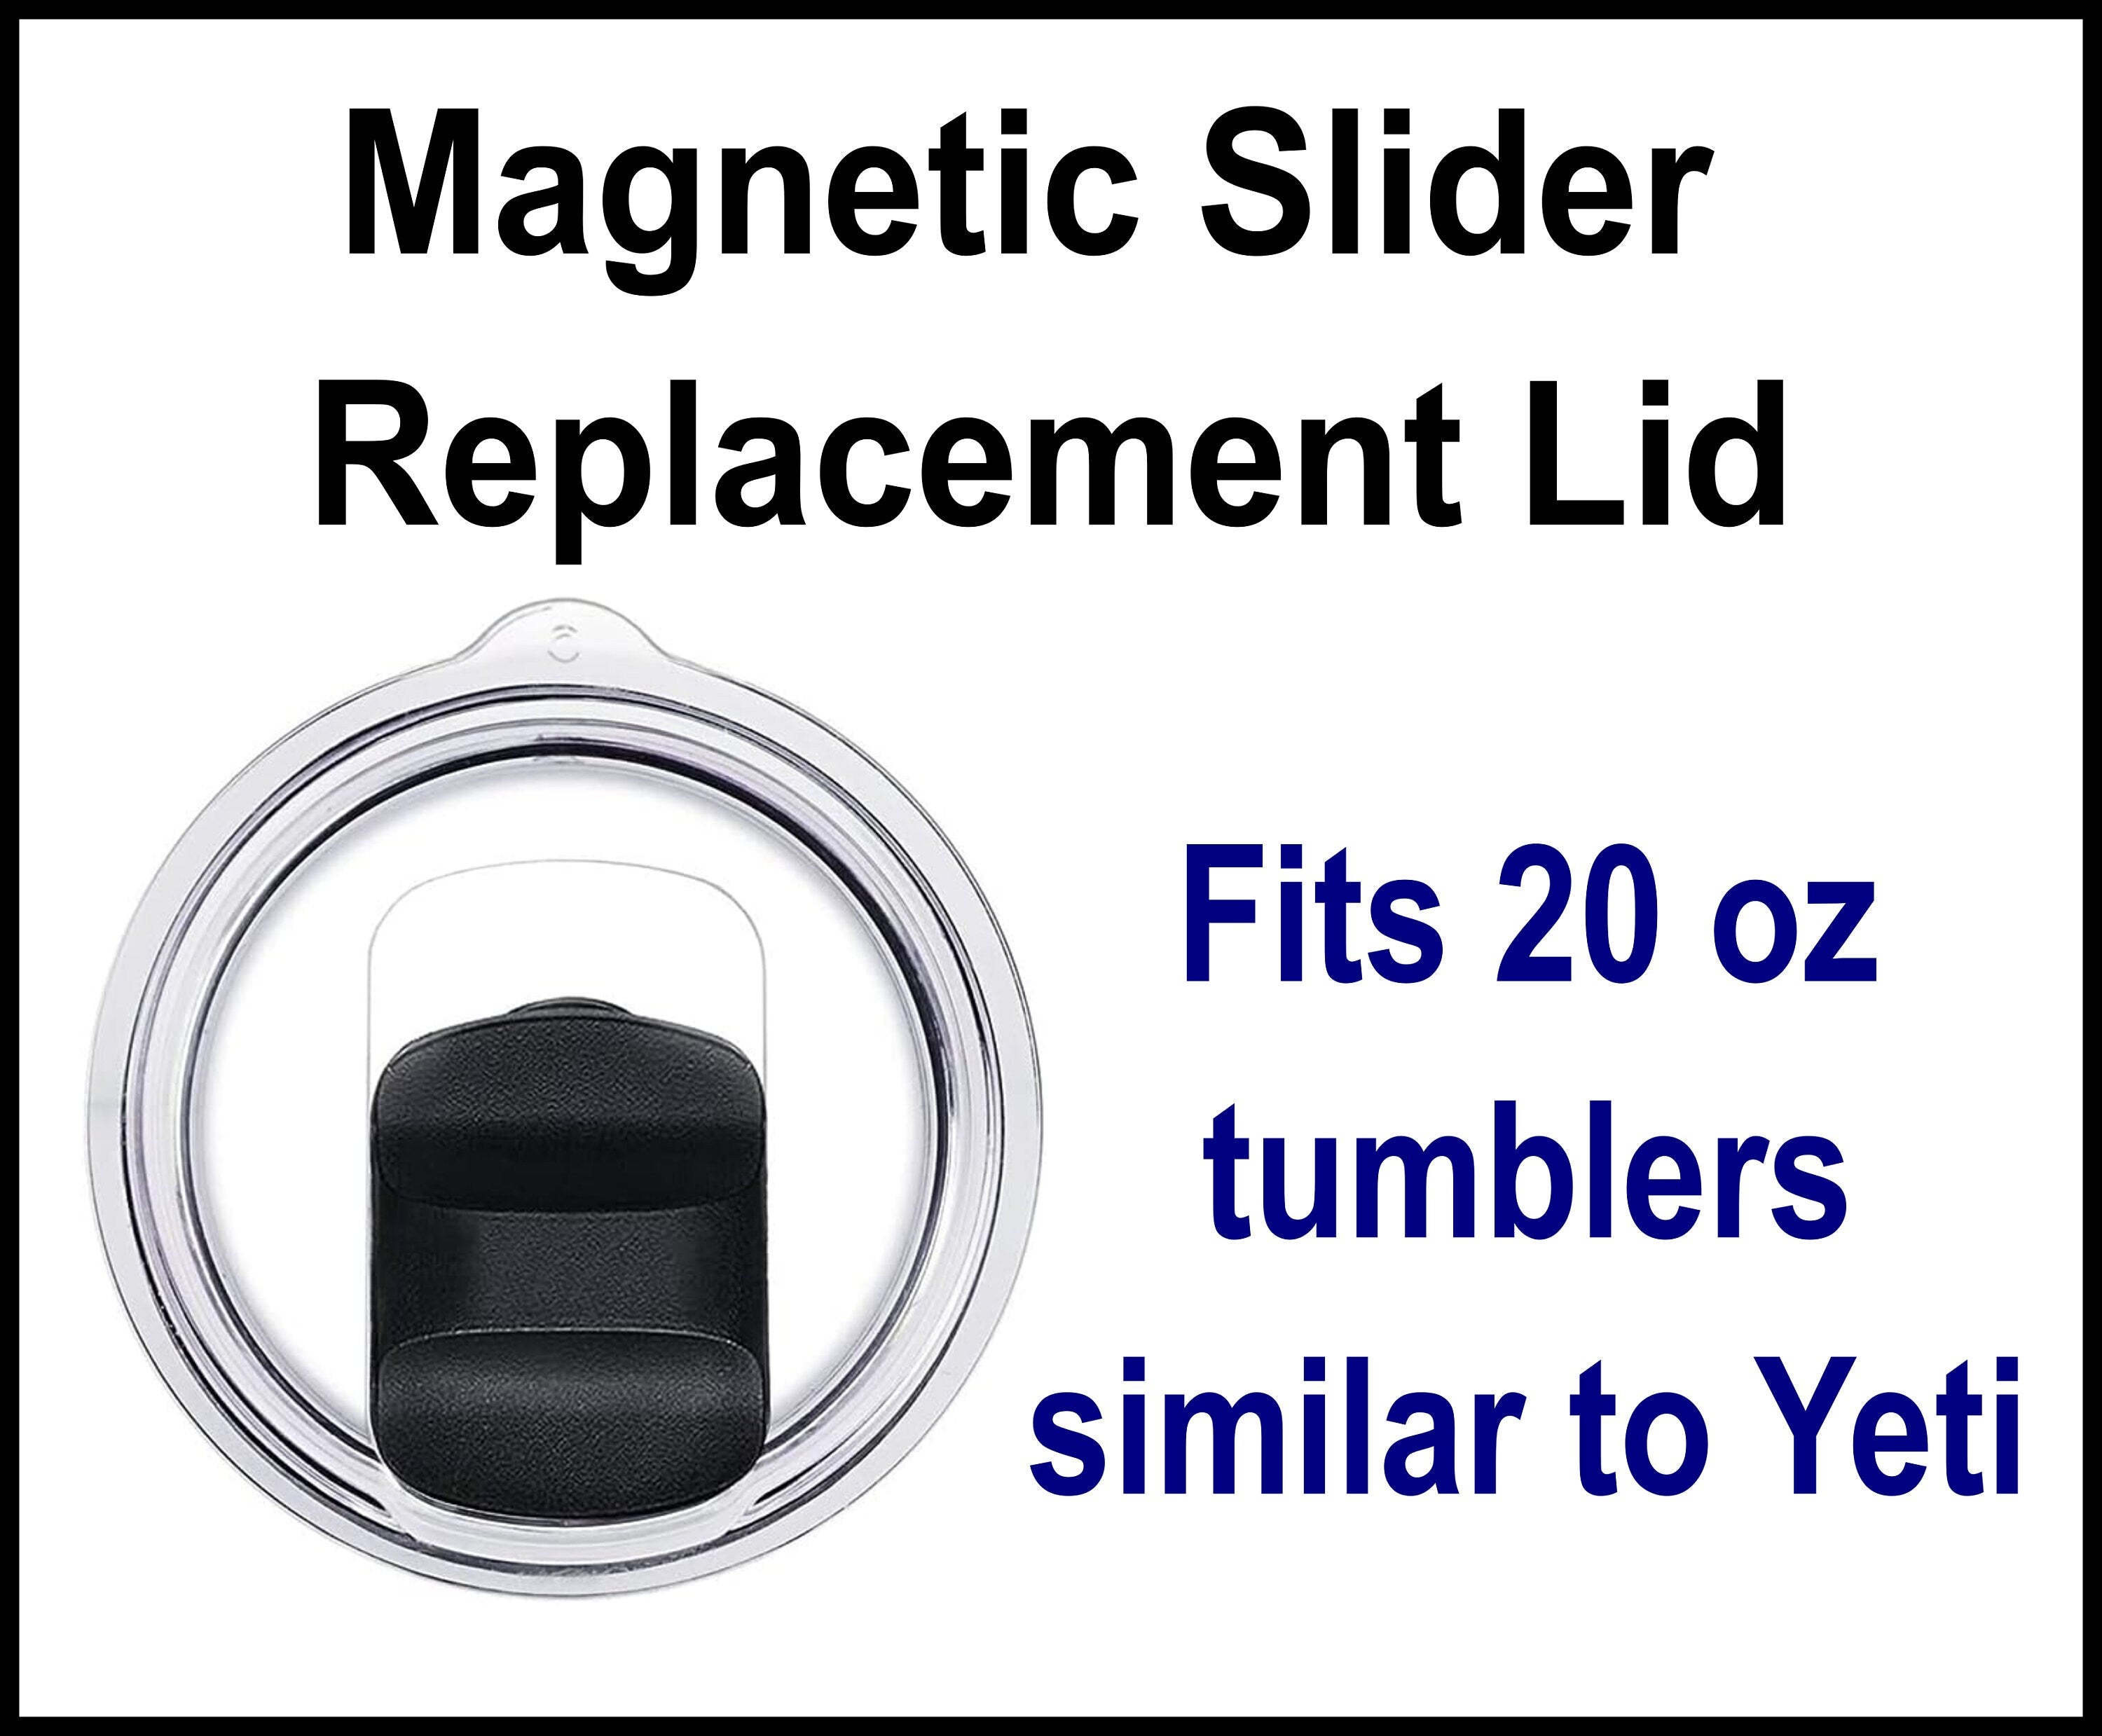 Magnetic Slider Replacement Lid for 20 oz Tumbler from Burnin